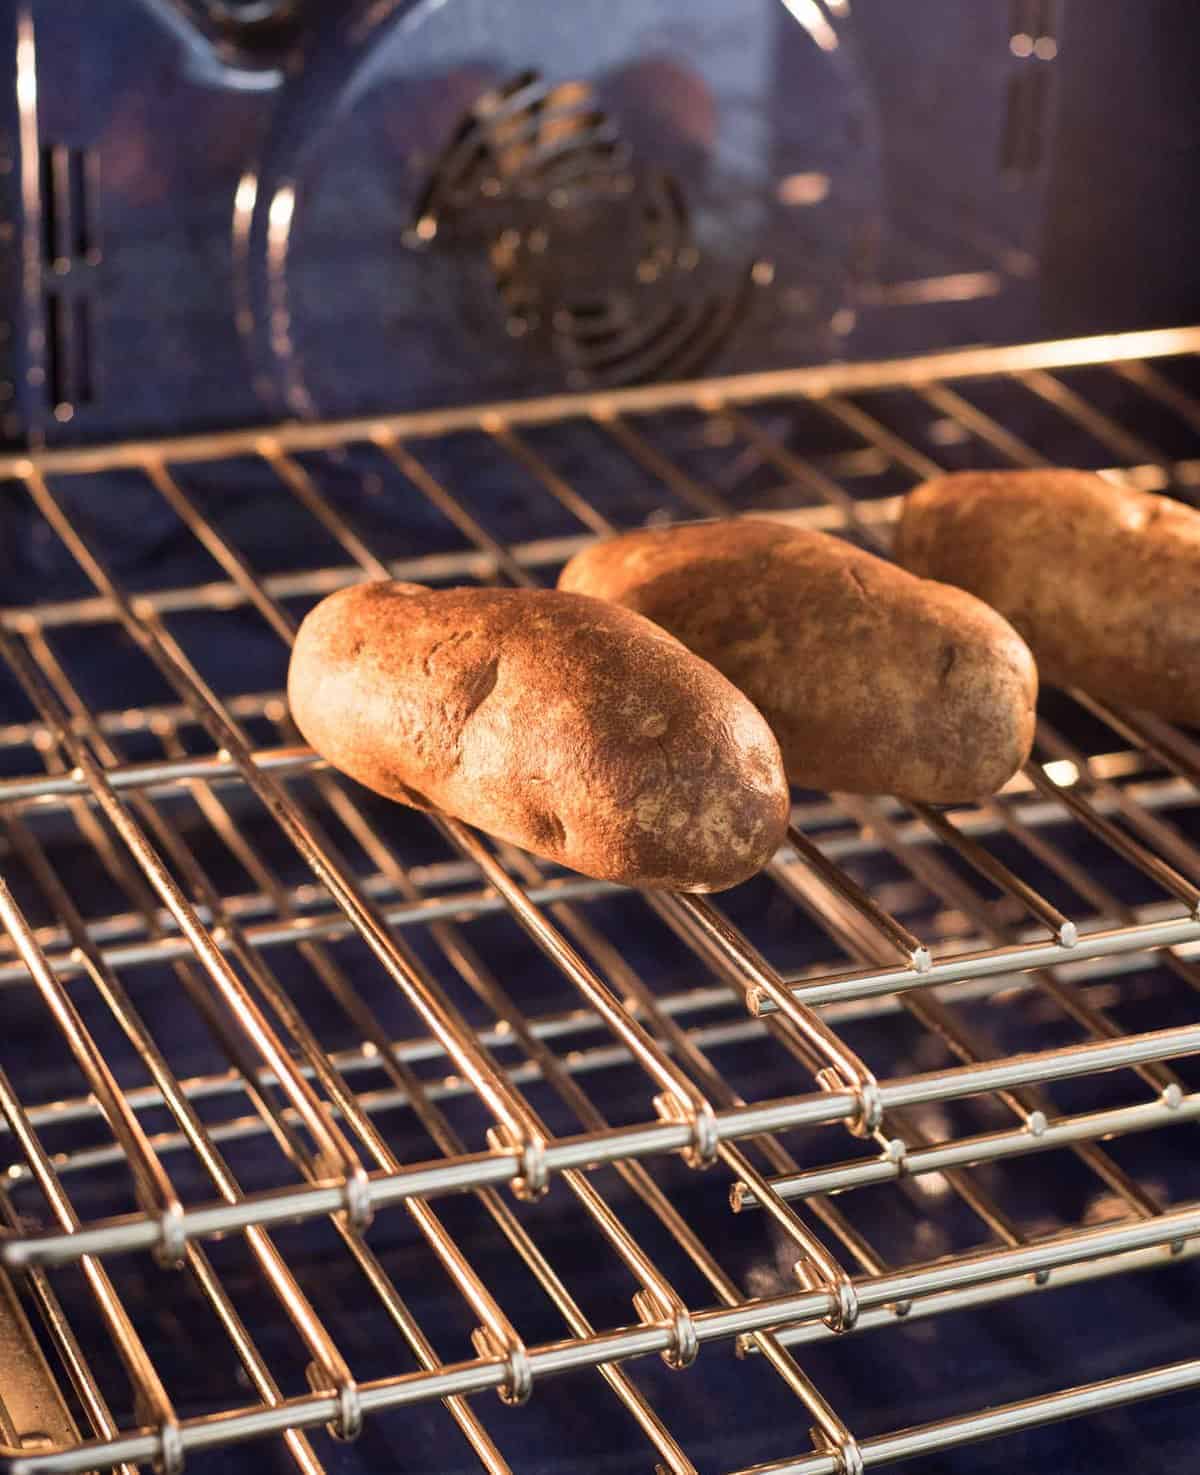 Oven Baked Potatoes Recipe